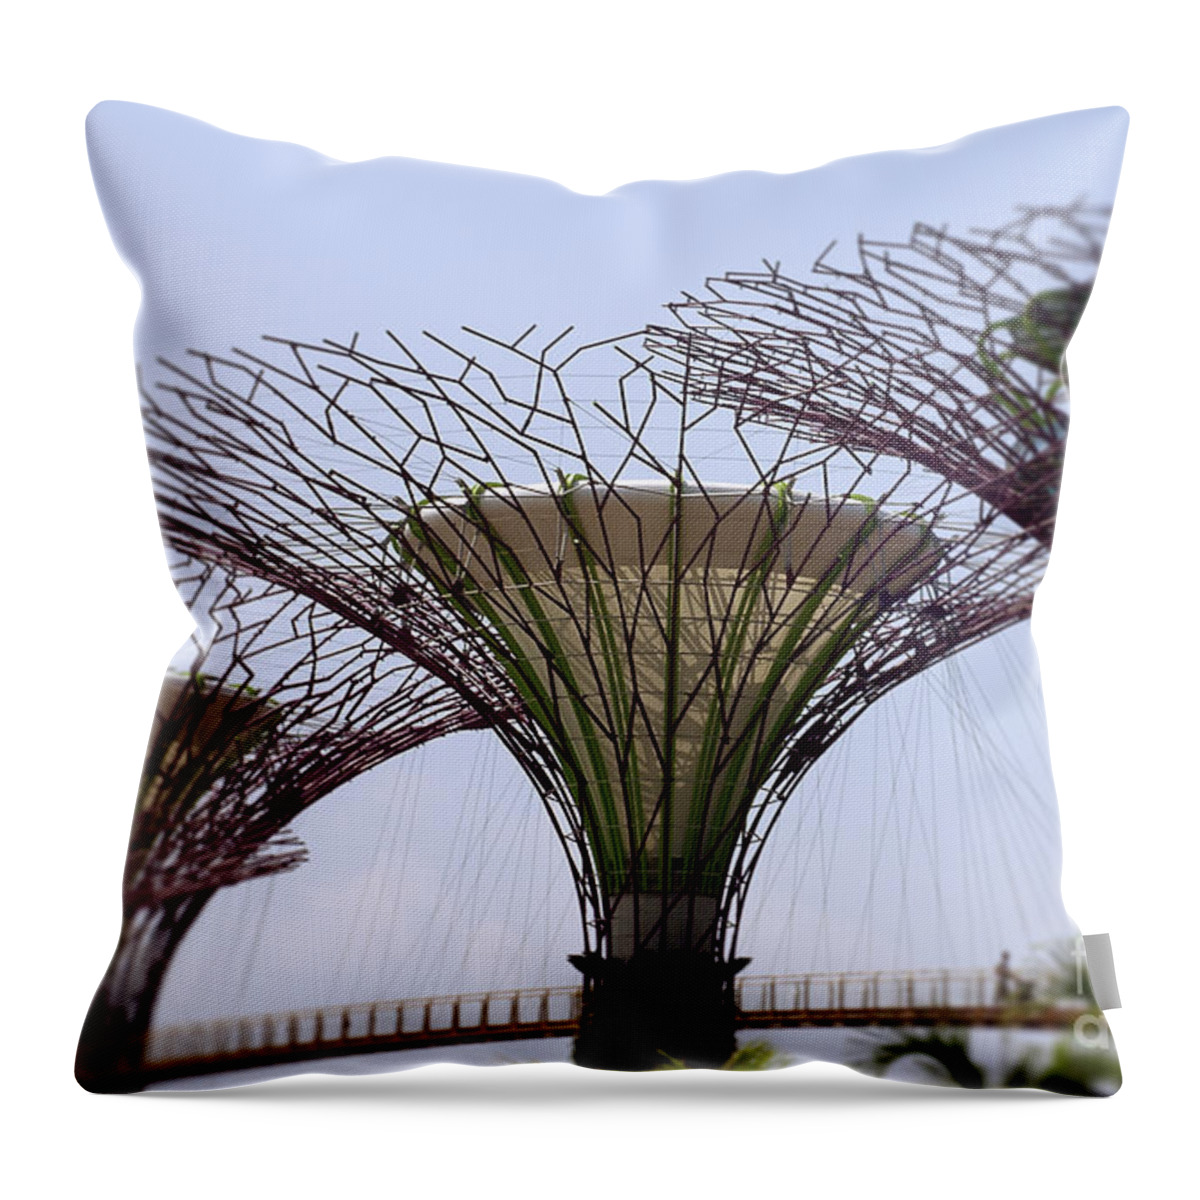 Supertrees Throw Pillow featuring the photograph The Supertrees by Ivy Ho